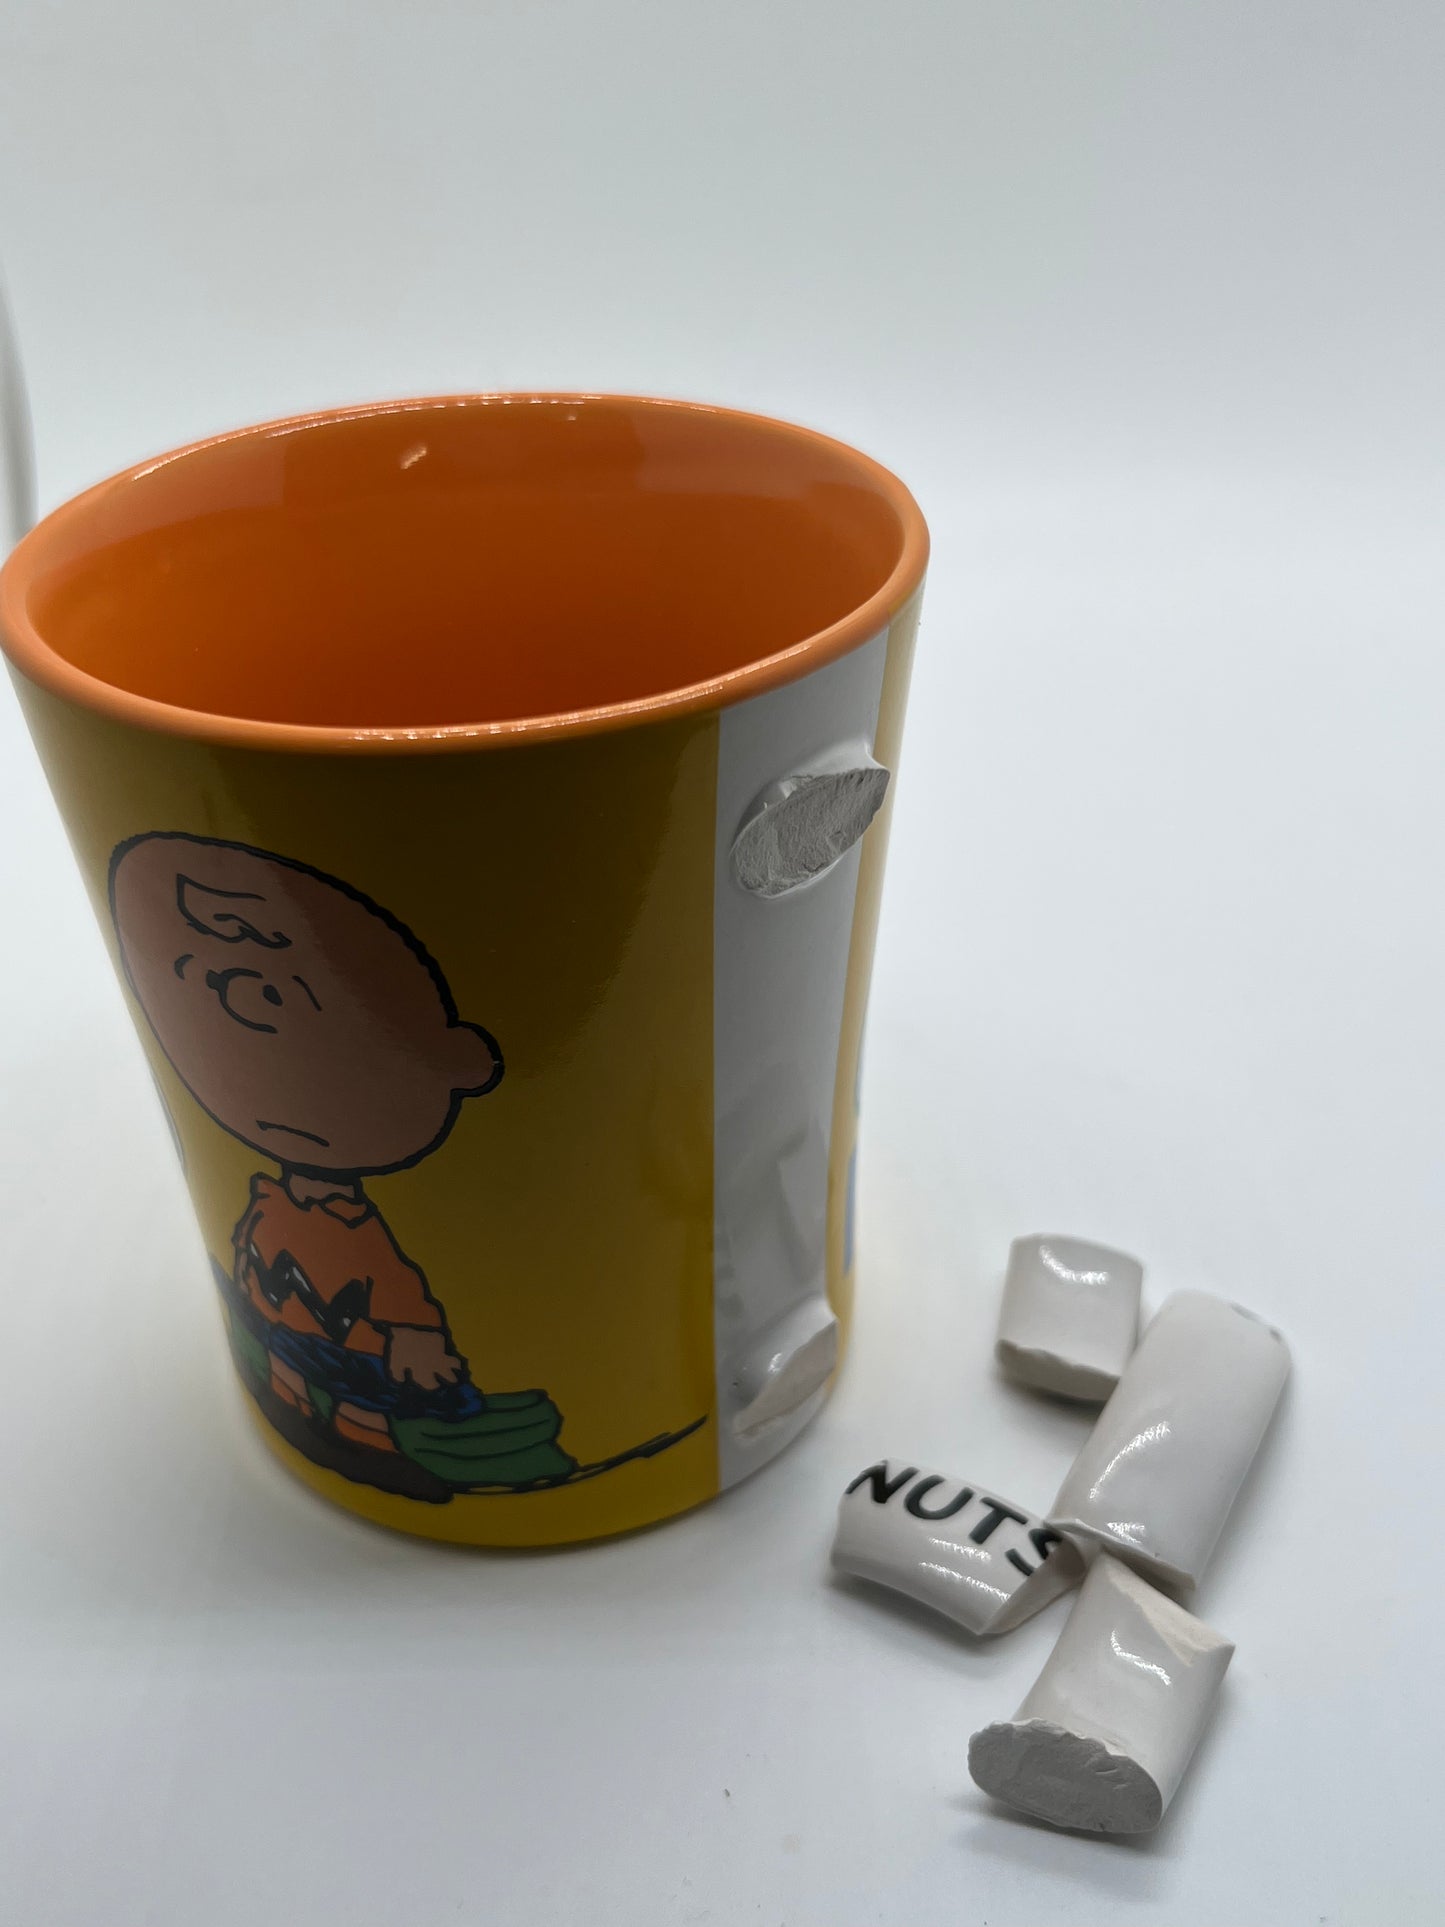 Peanuts Charlie Brown & Snoopy The World Is Filled With Mondays Coffee Mug